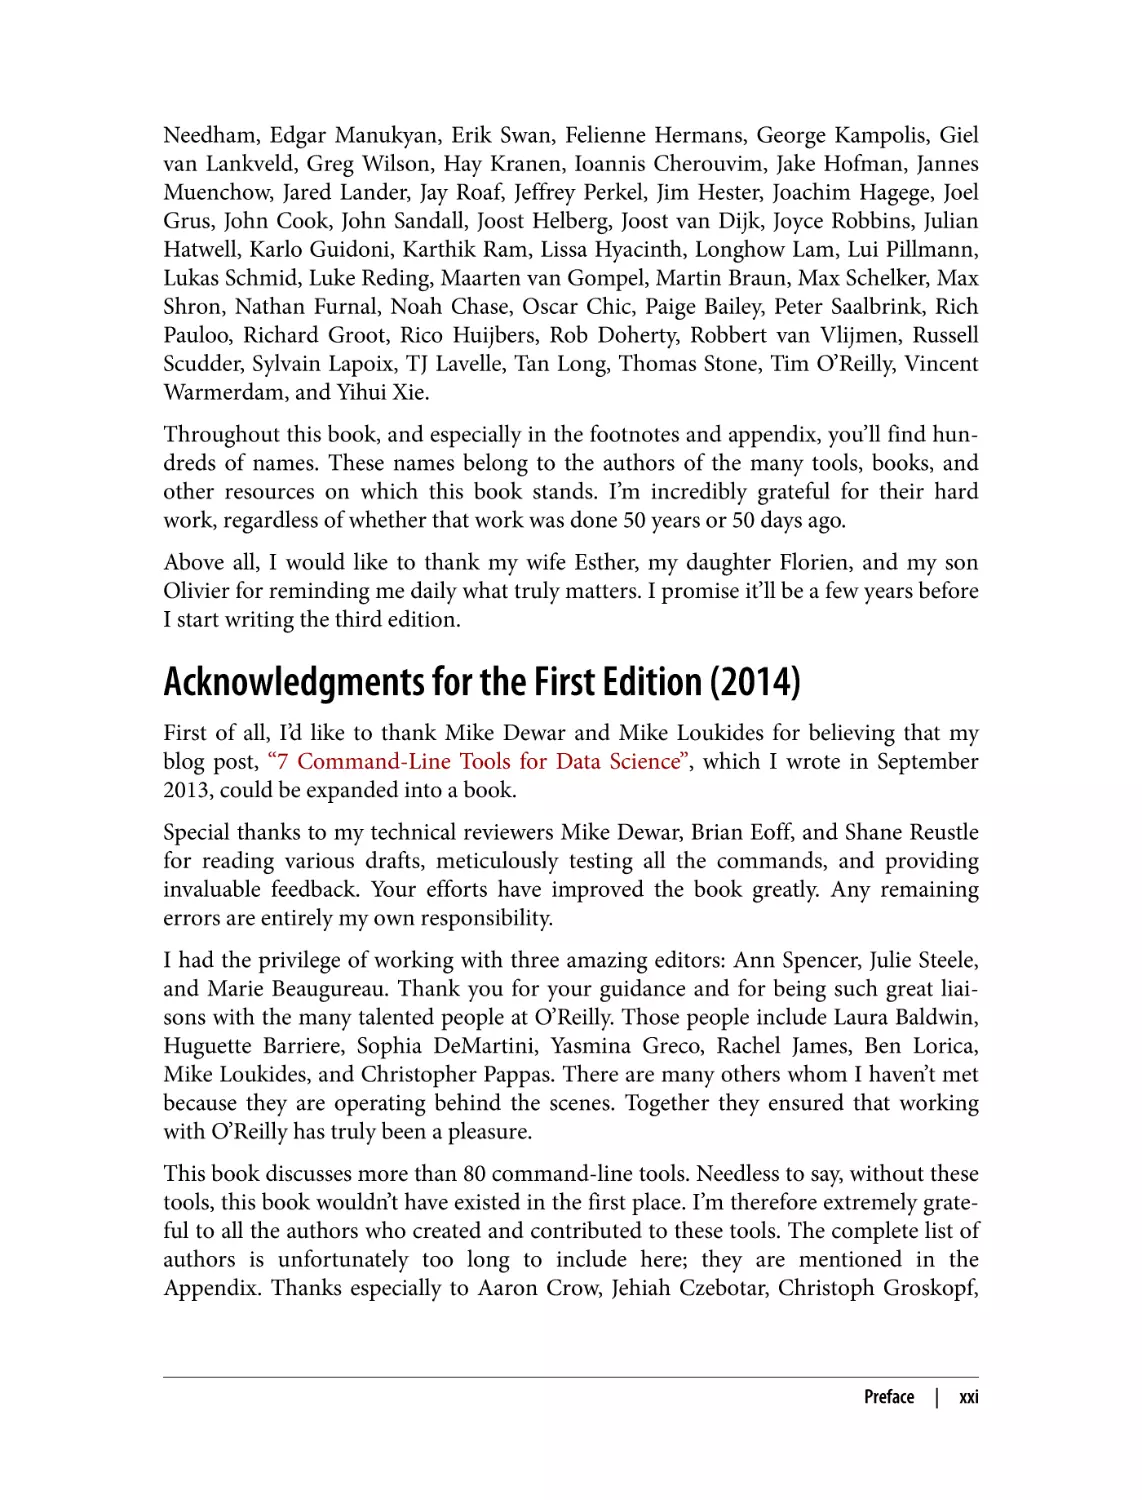 Acknowledgments for the First Edition (2014)